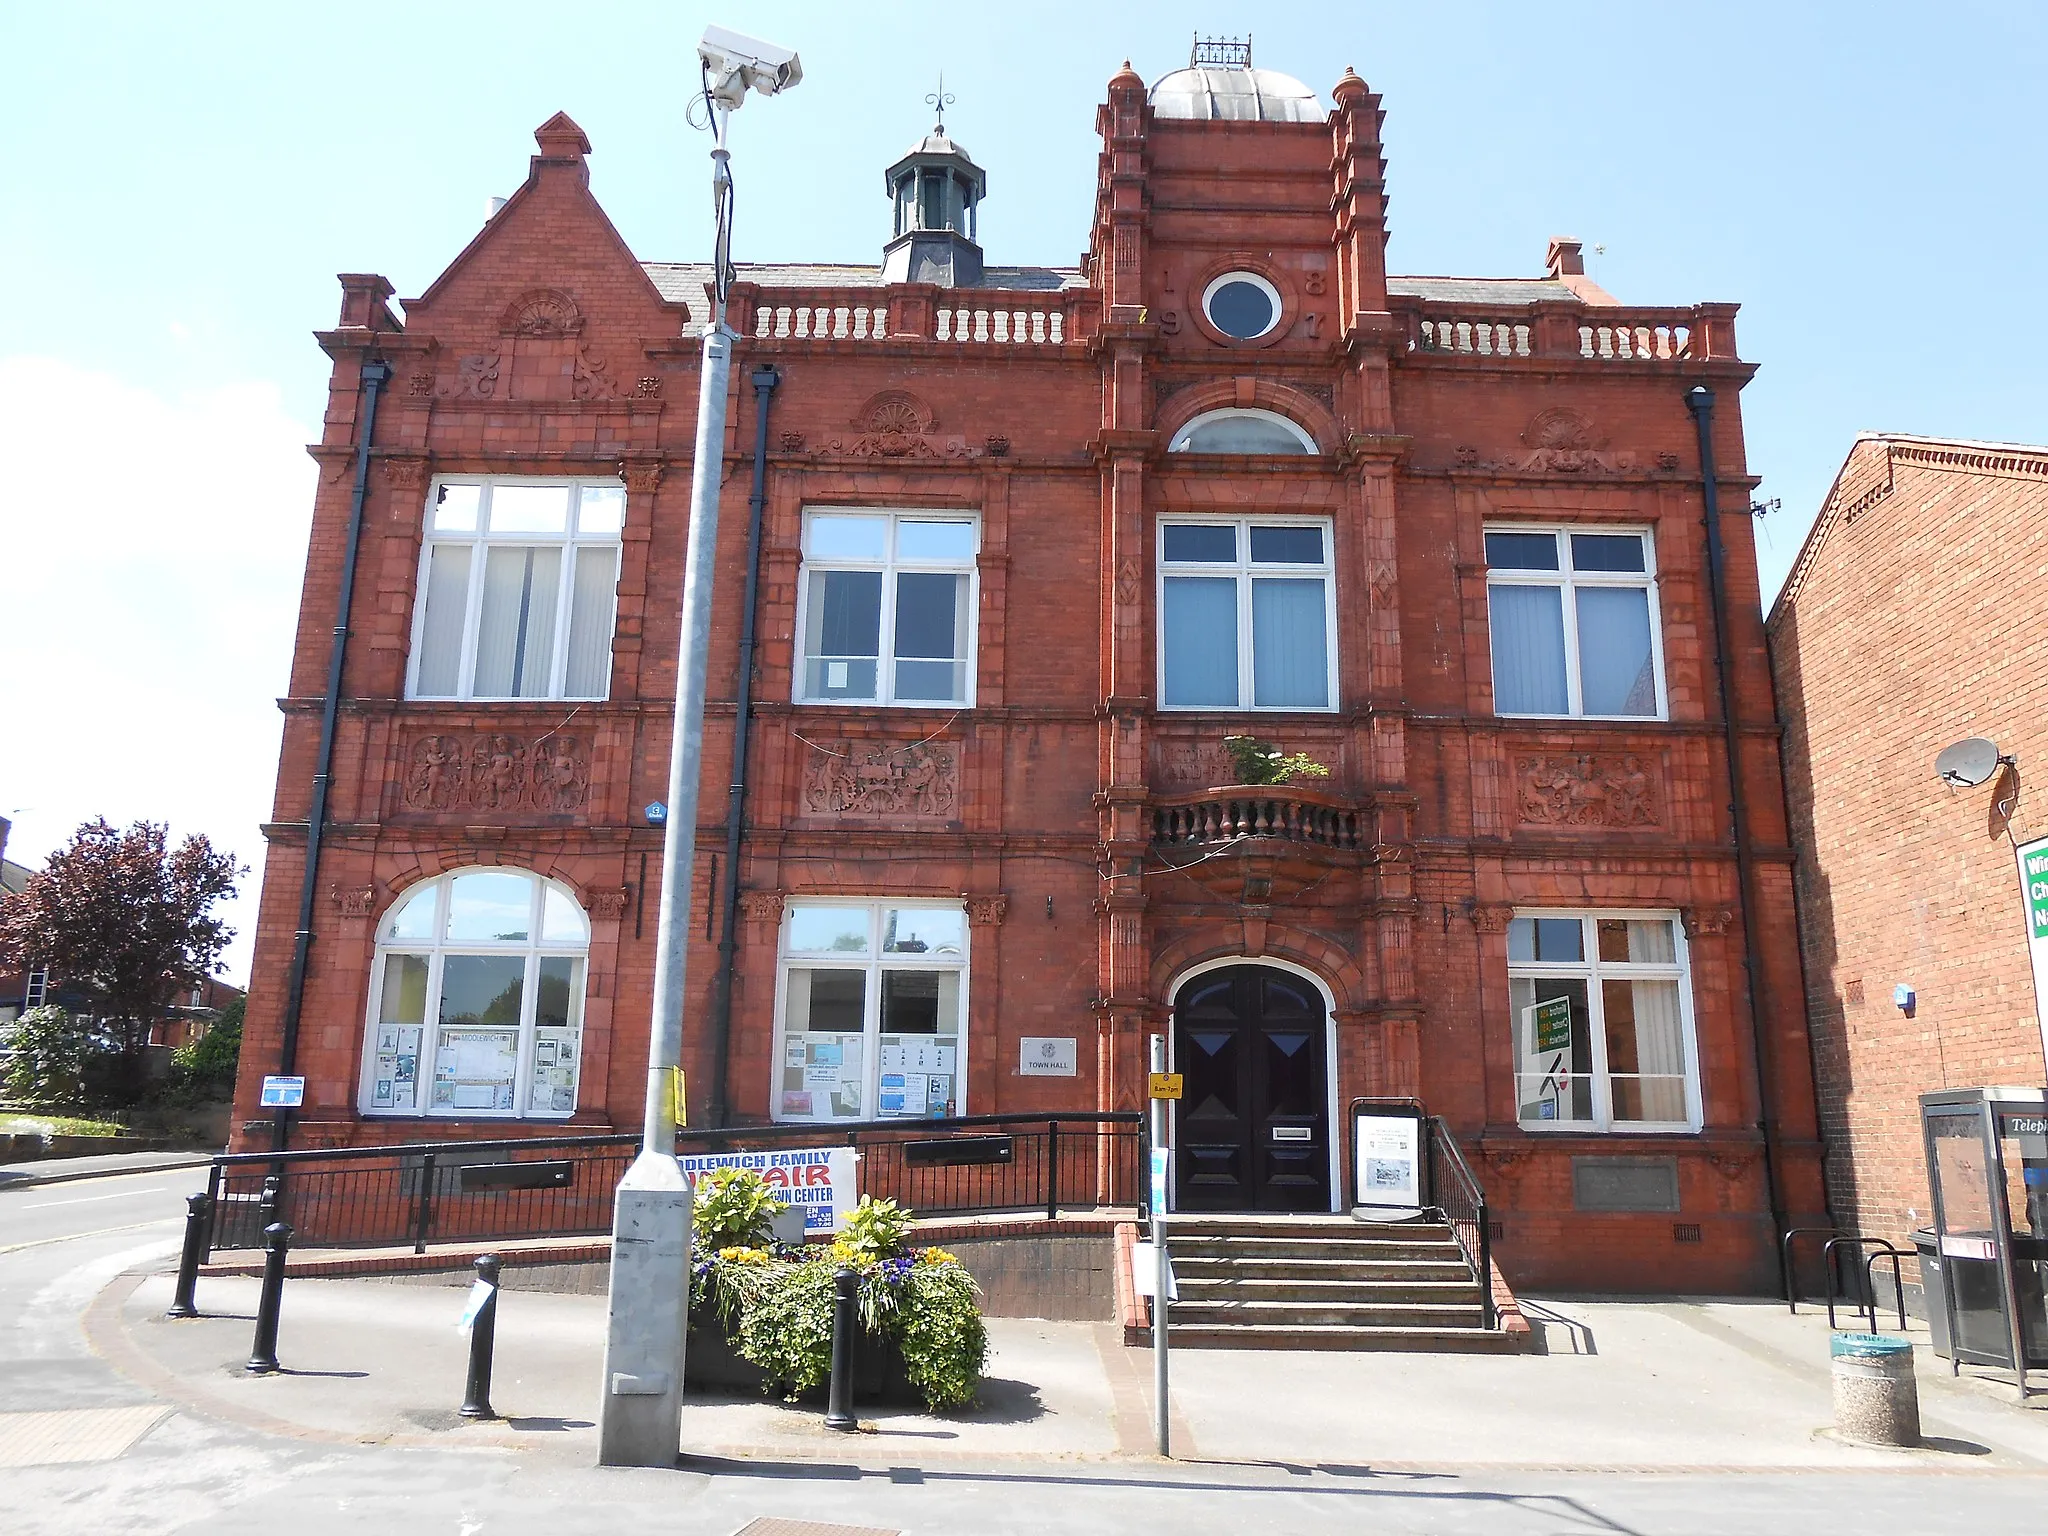 Photo showing: Middlewich Town Hall, Cheshire, England.